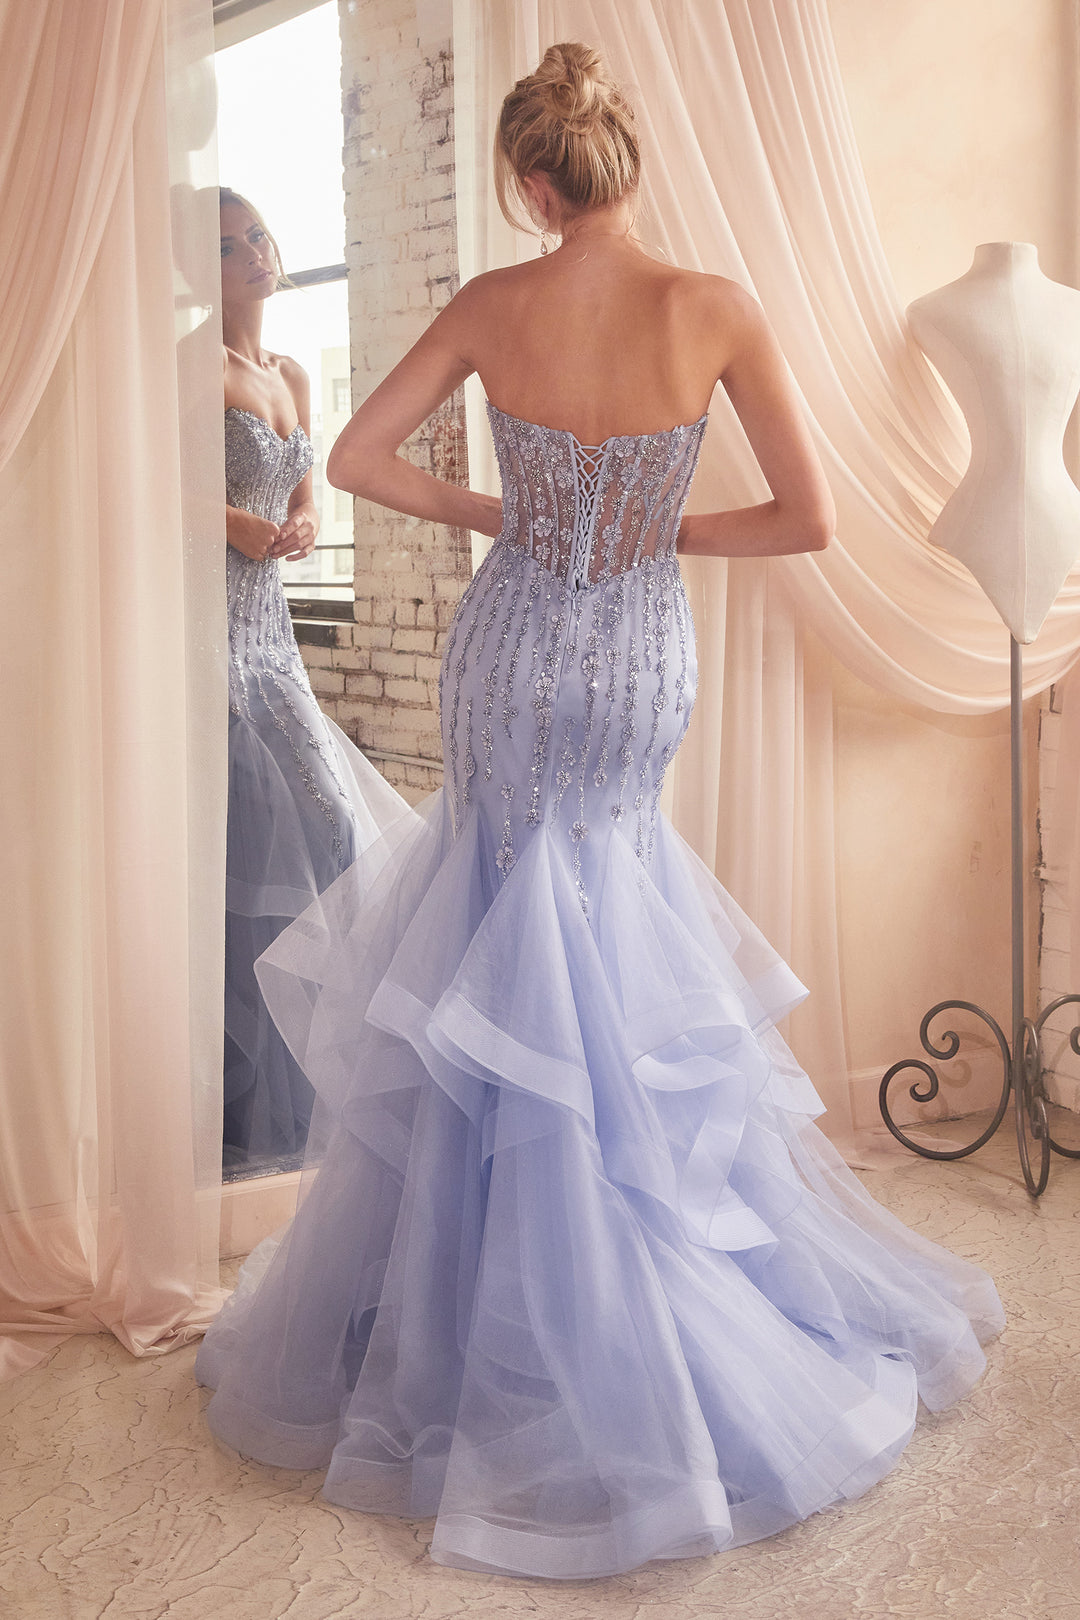 Beaded Strapless Tiered Mermaid Dress by Ladivine CD332